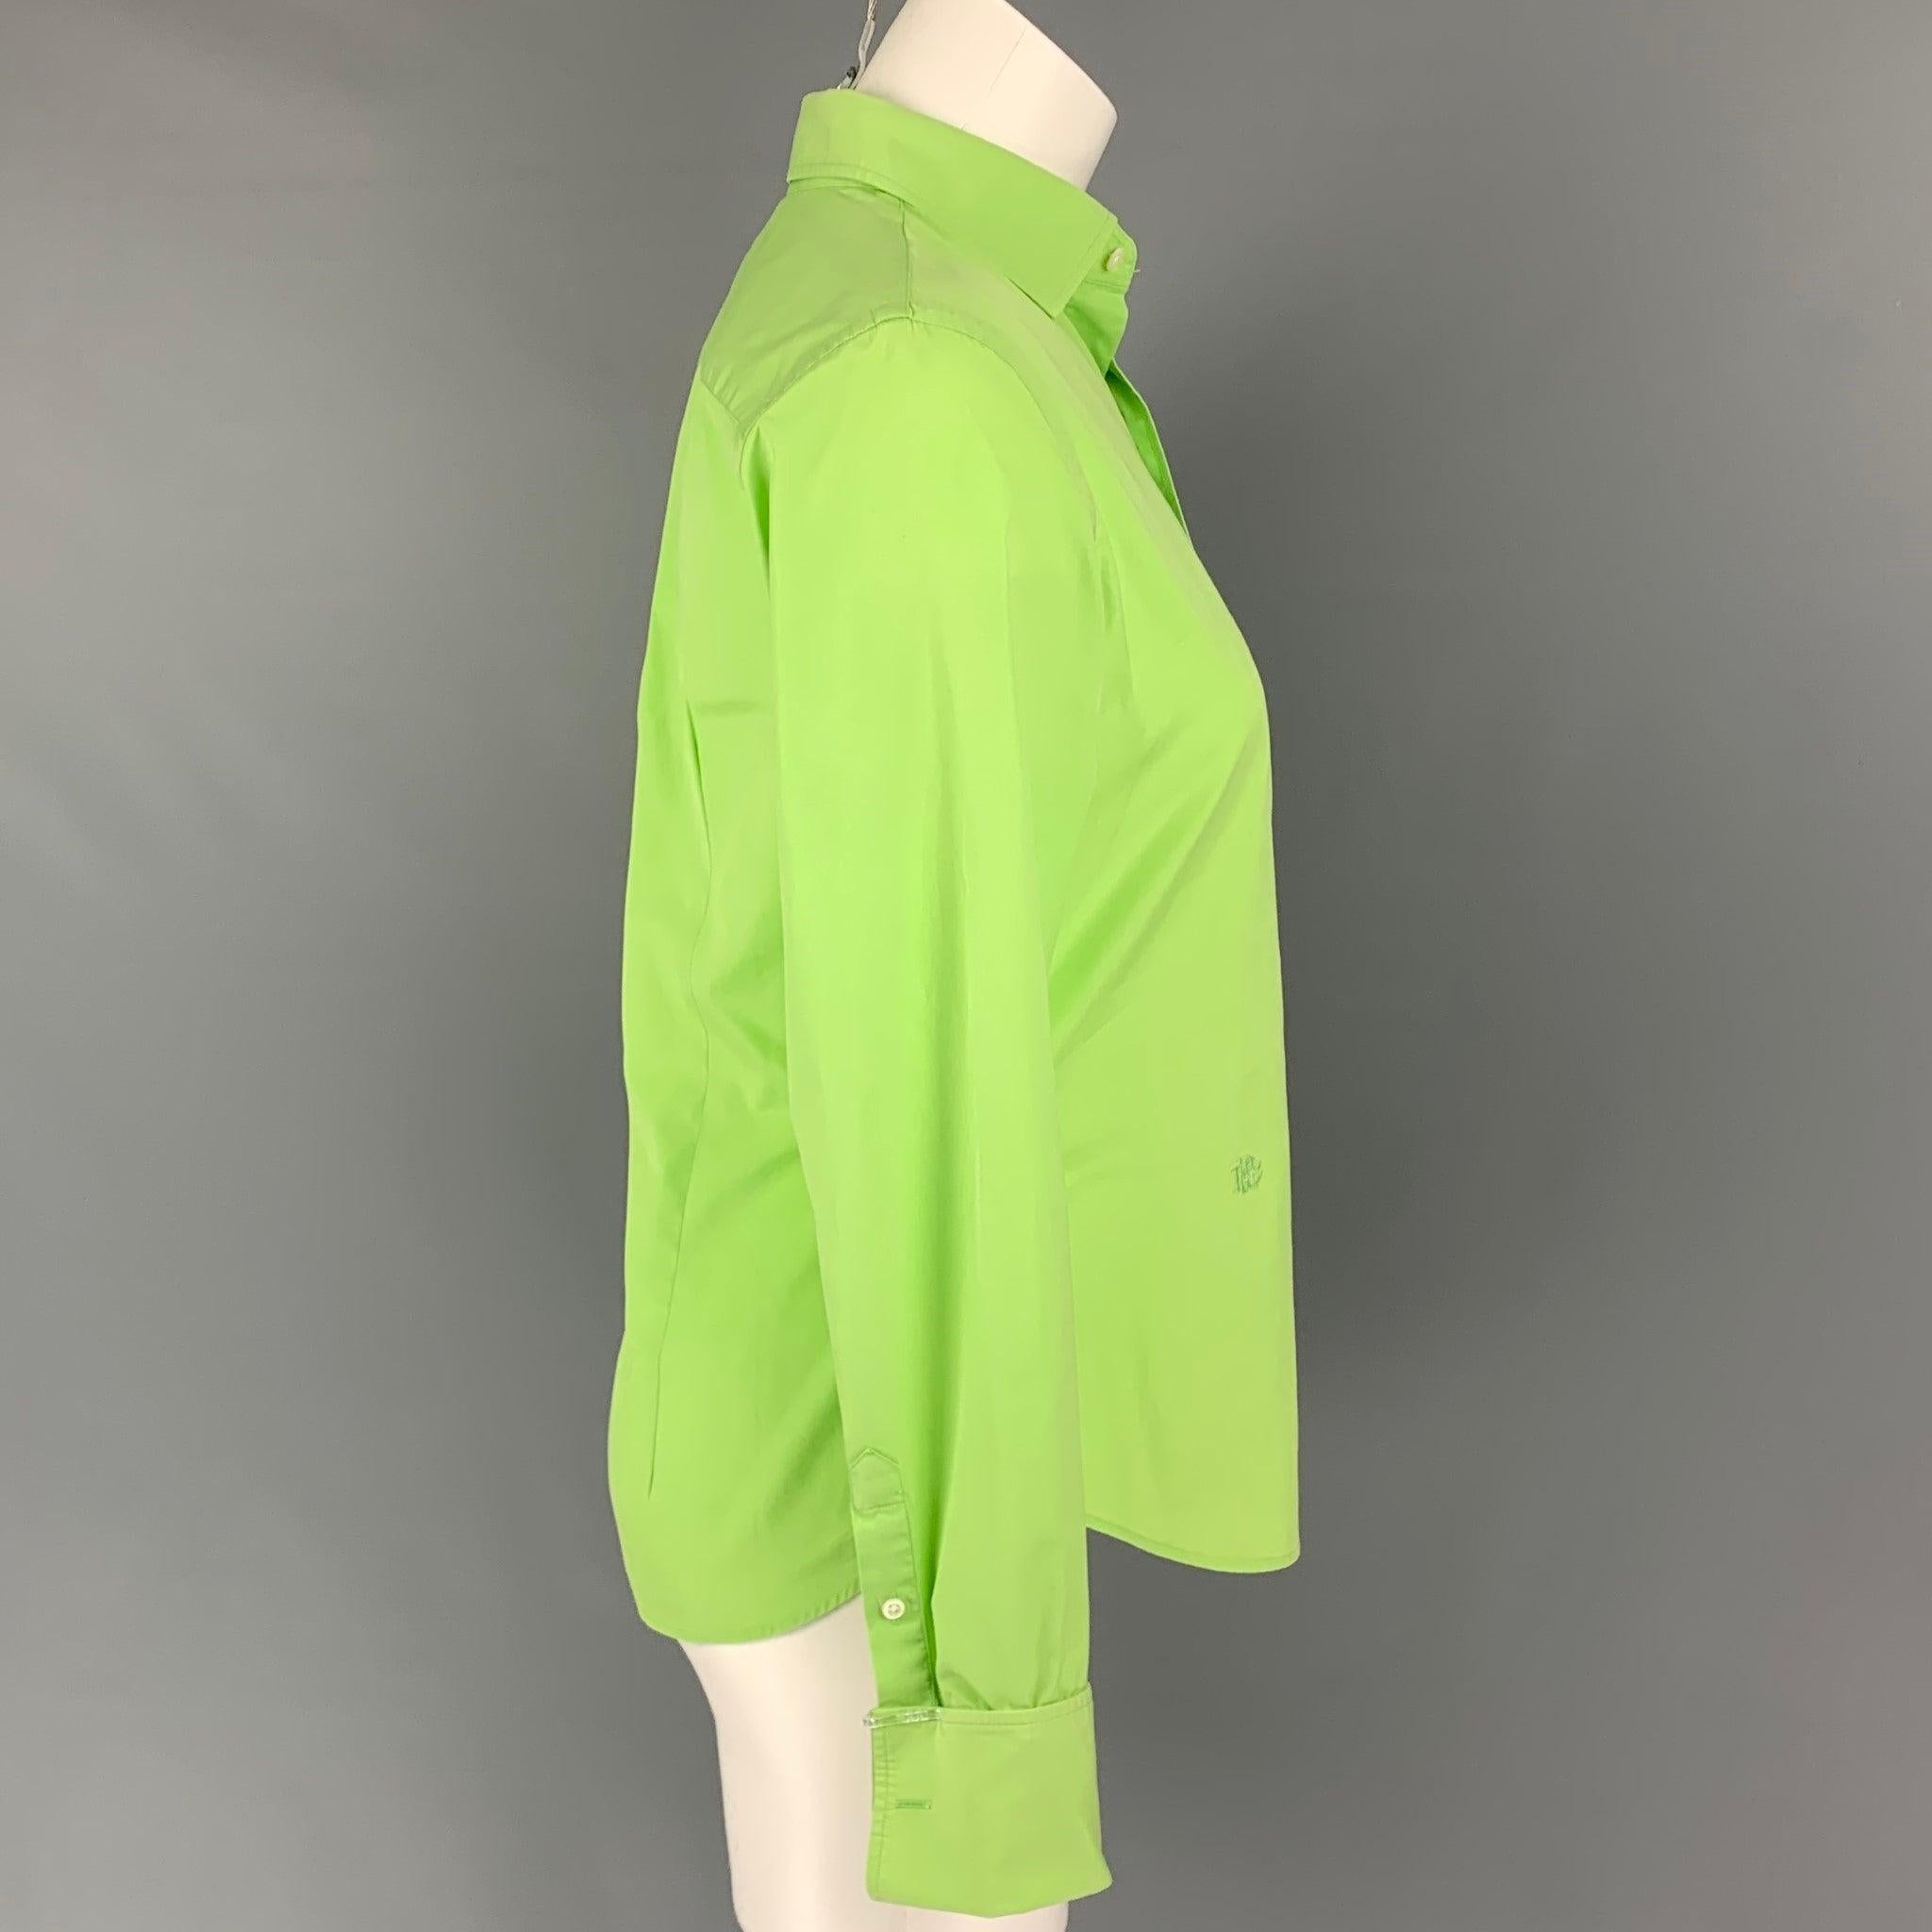 RALPH LAUREN Collection Size 8 Chartreuse Cotton French Cuff Shirt In Good Condition For Sale In San Francisco, CA